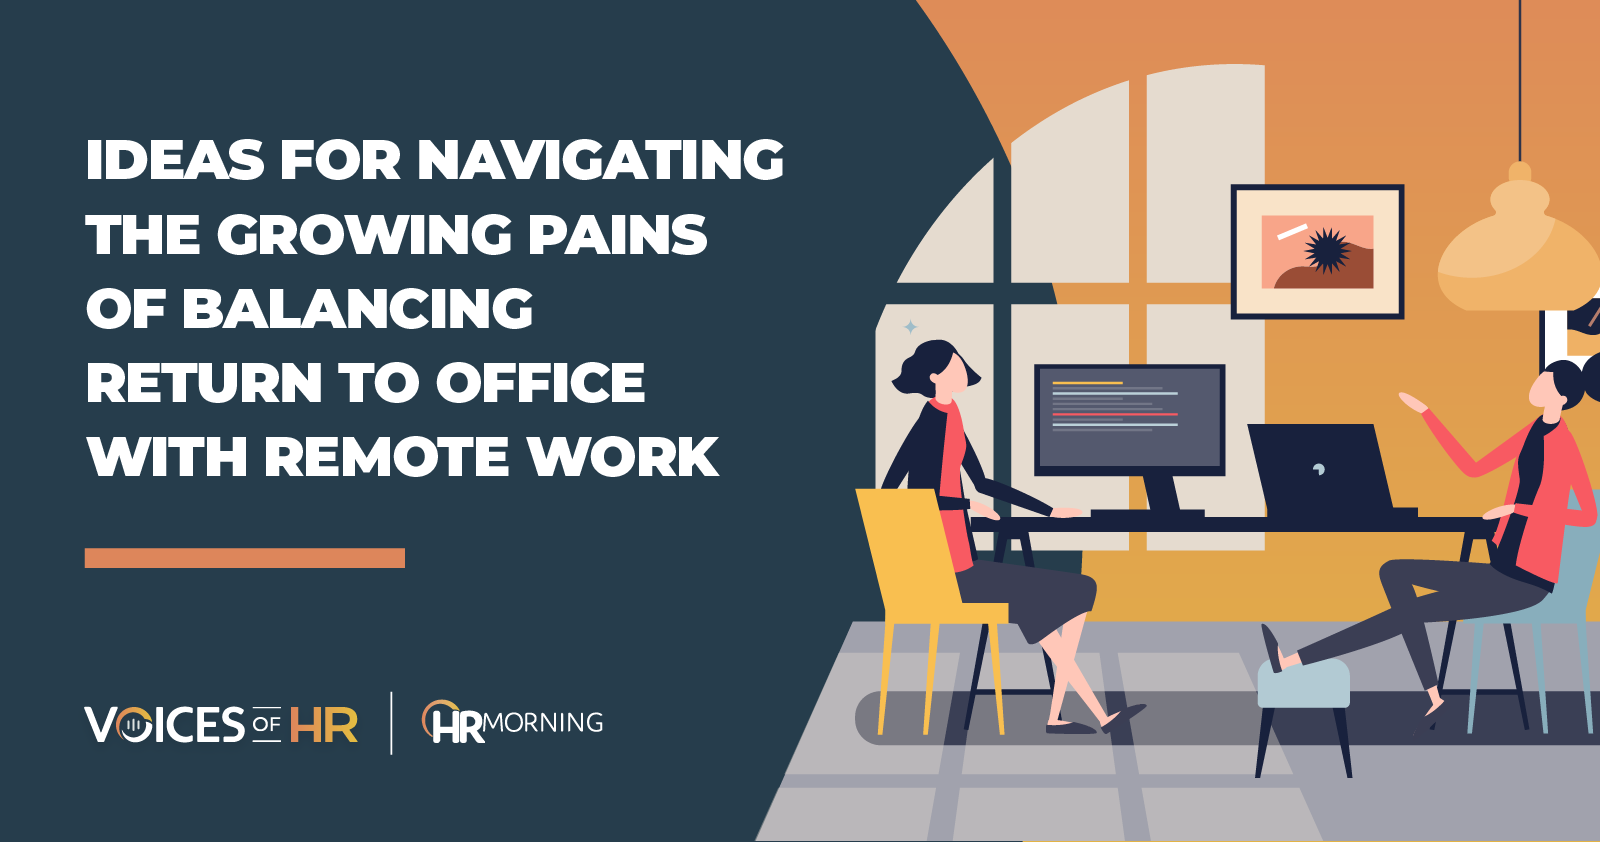 Ideas for navigating the growing pains of balancing return to office with remote work